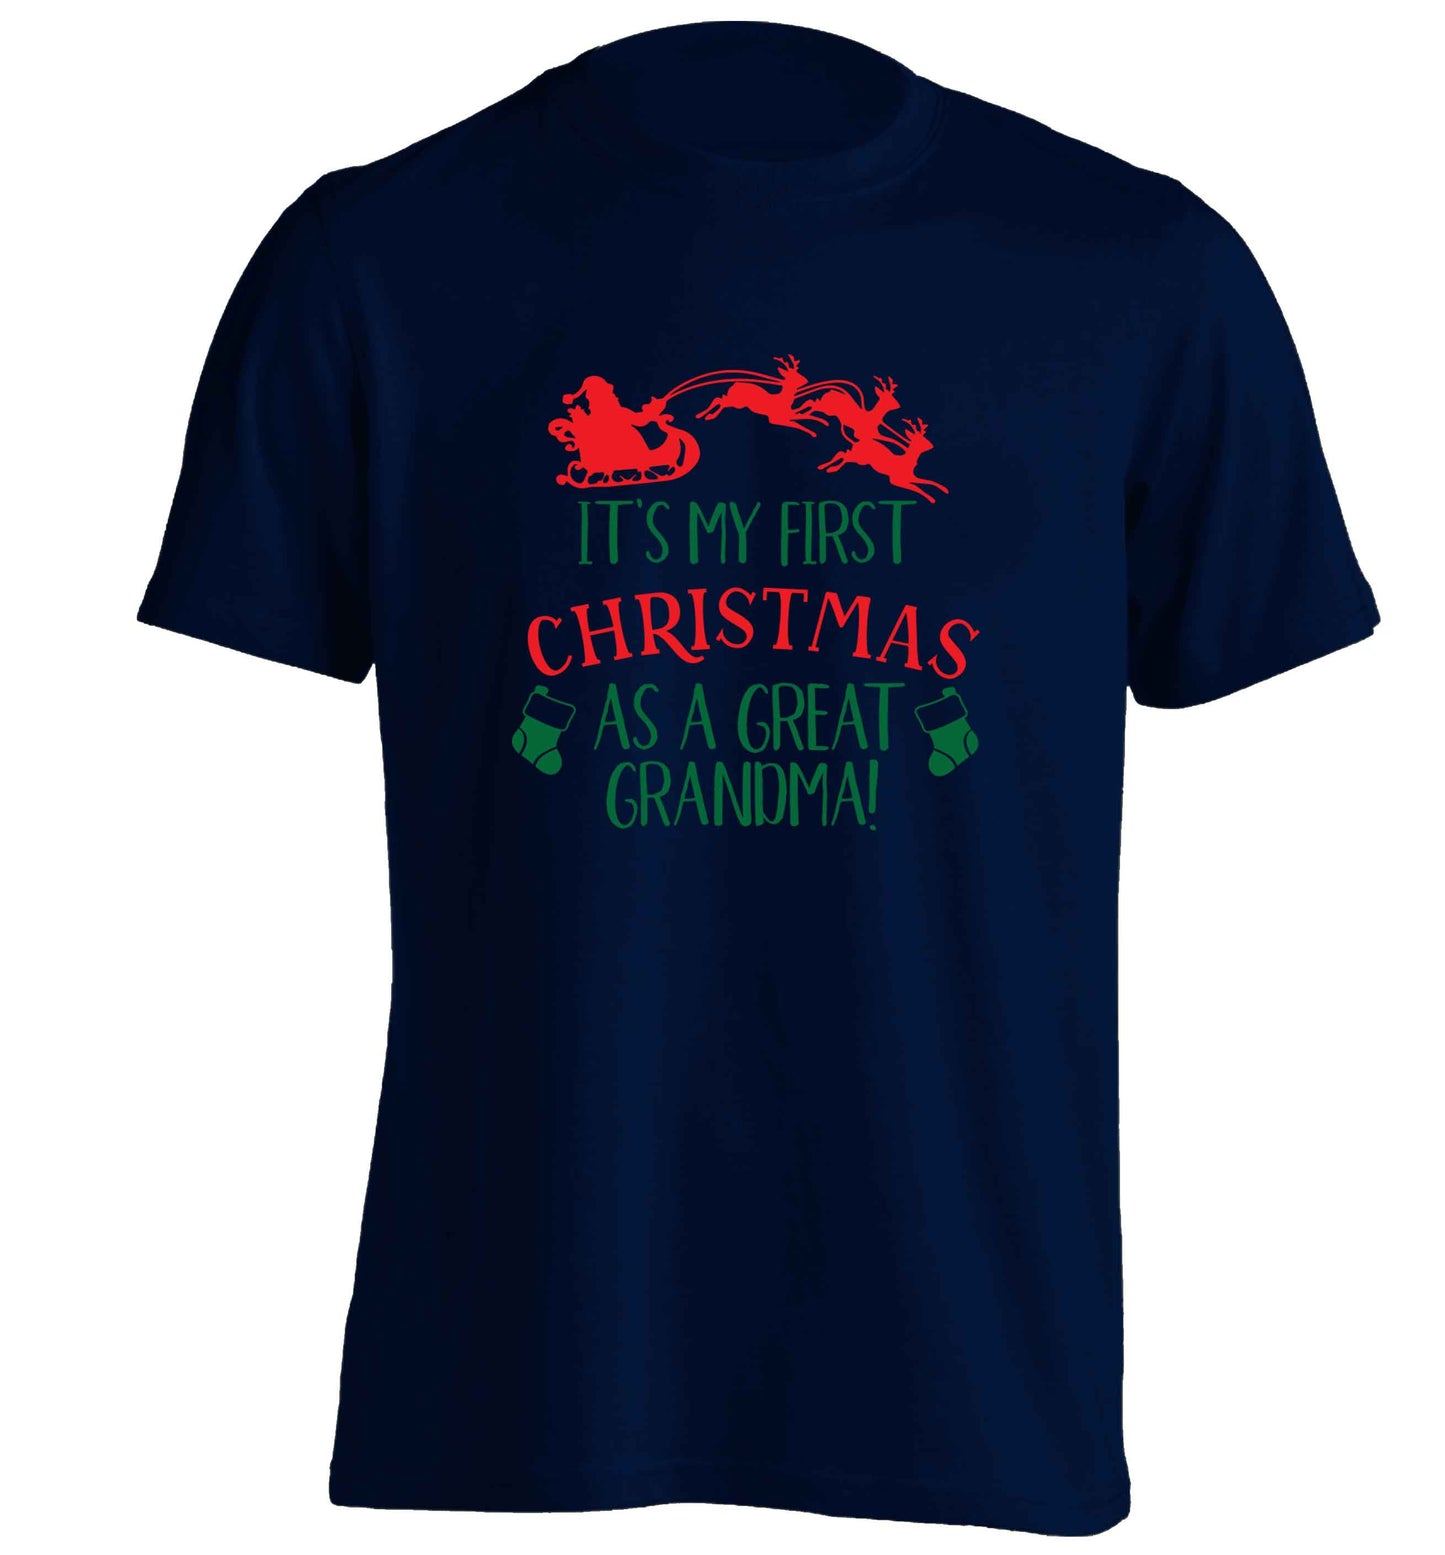 It's my first Christmas as a great grandma! adults unisex navy Tshirt 2XL